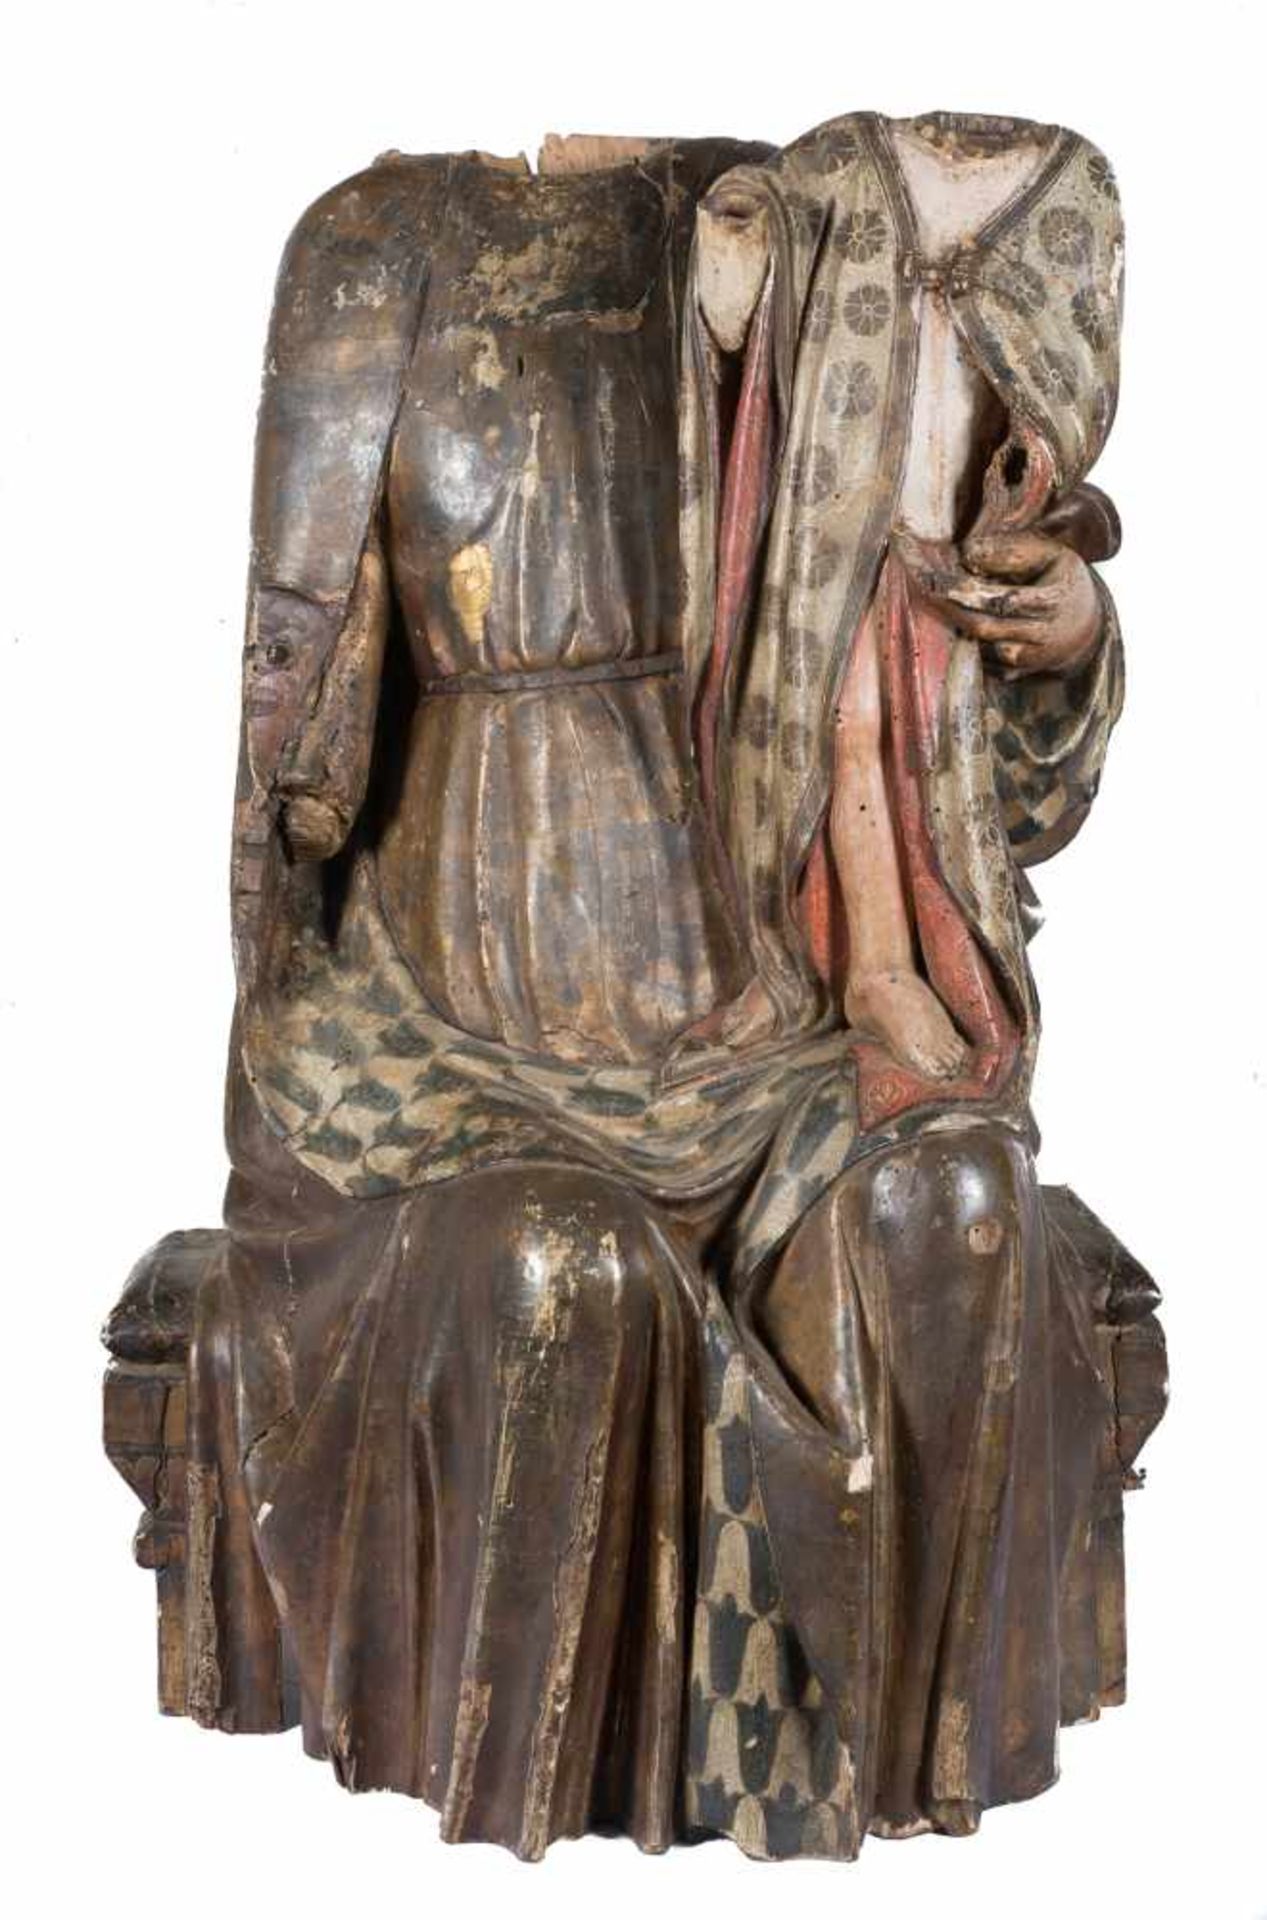 Seat of Wisdom (Sedes Sapientiae). Carved and polychromed wooden sculpture. 14th – 15th century.Seat